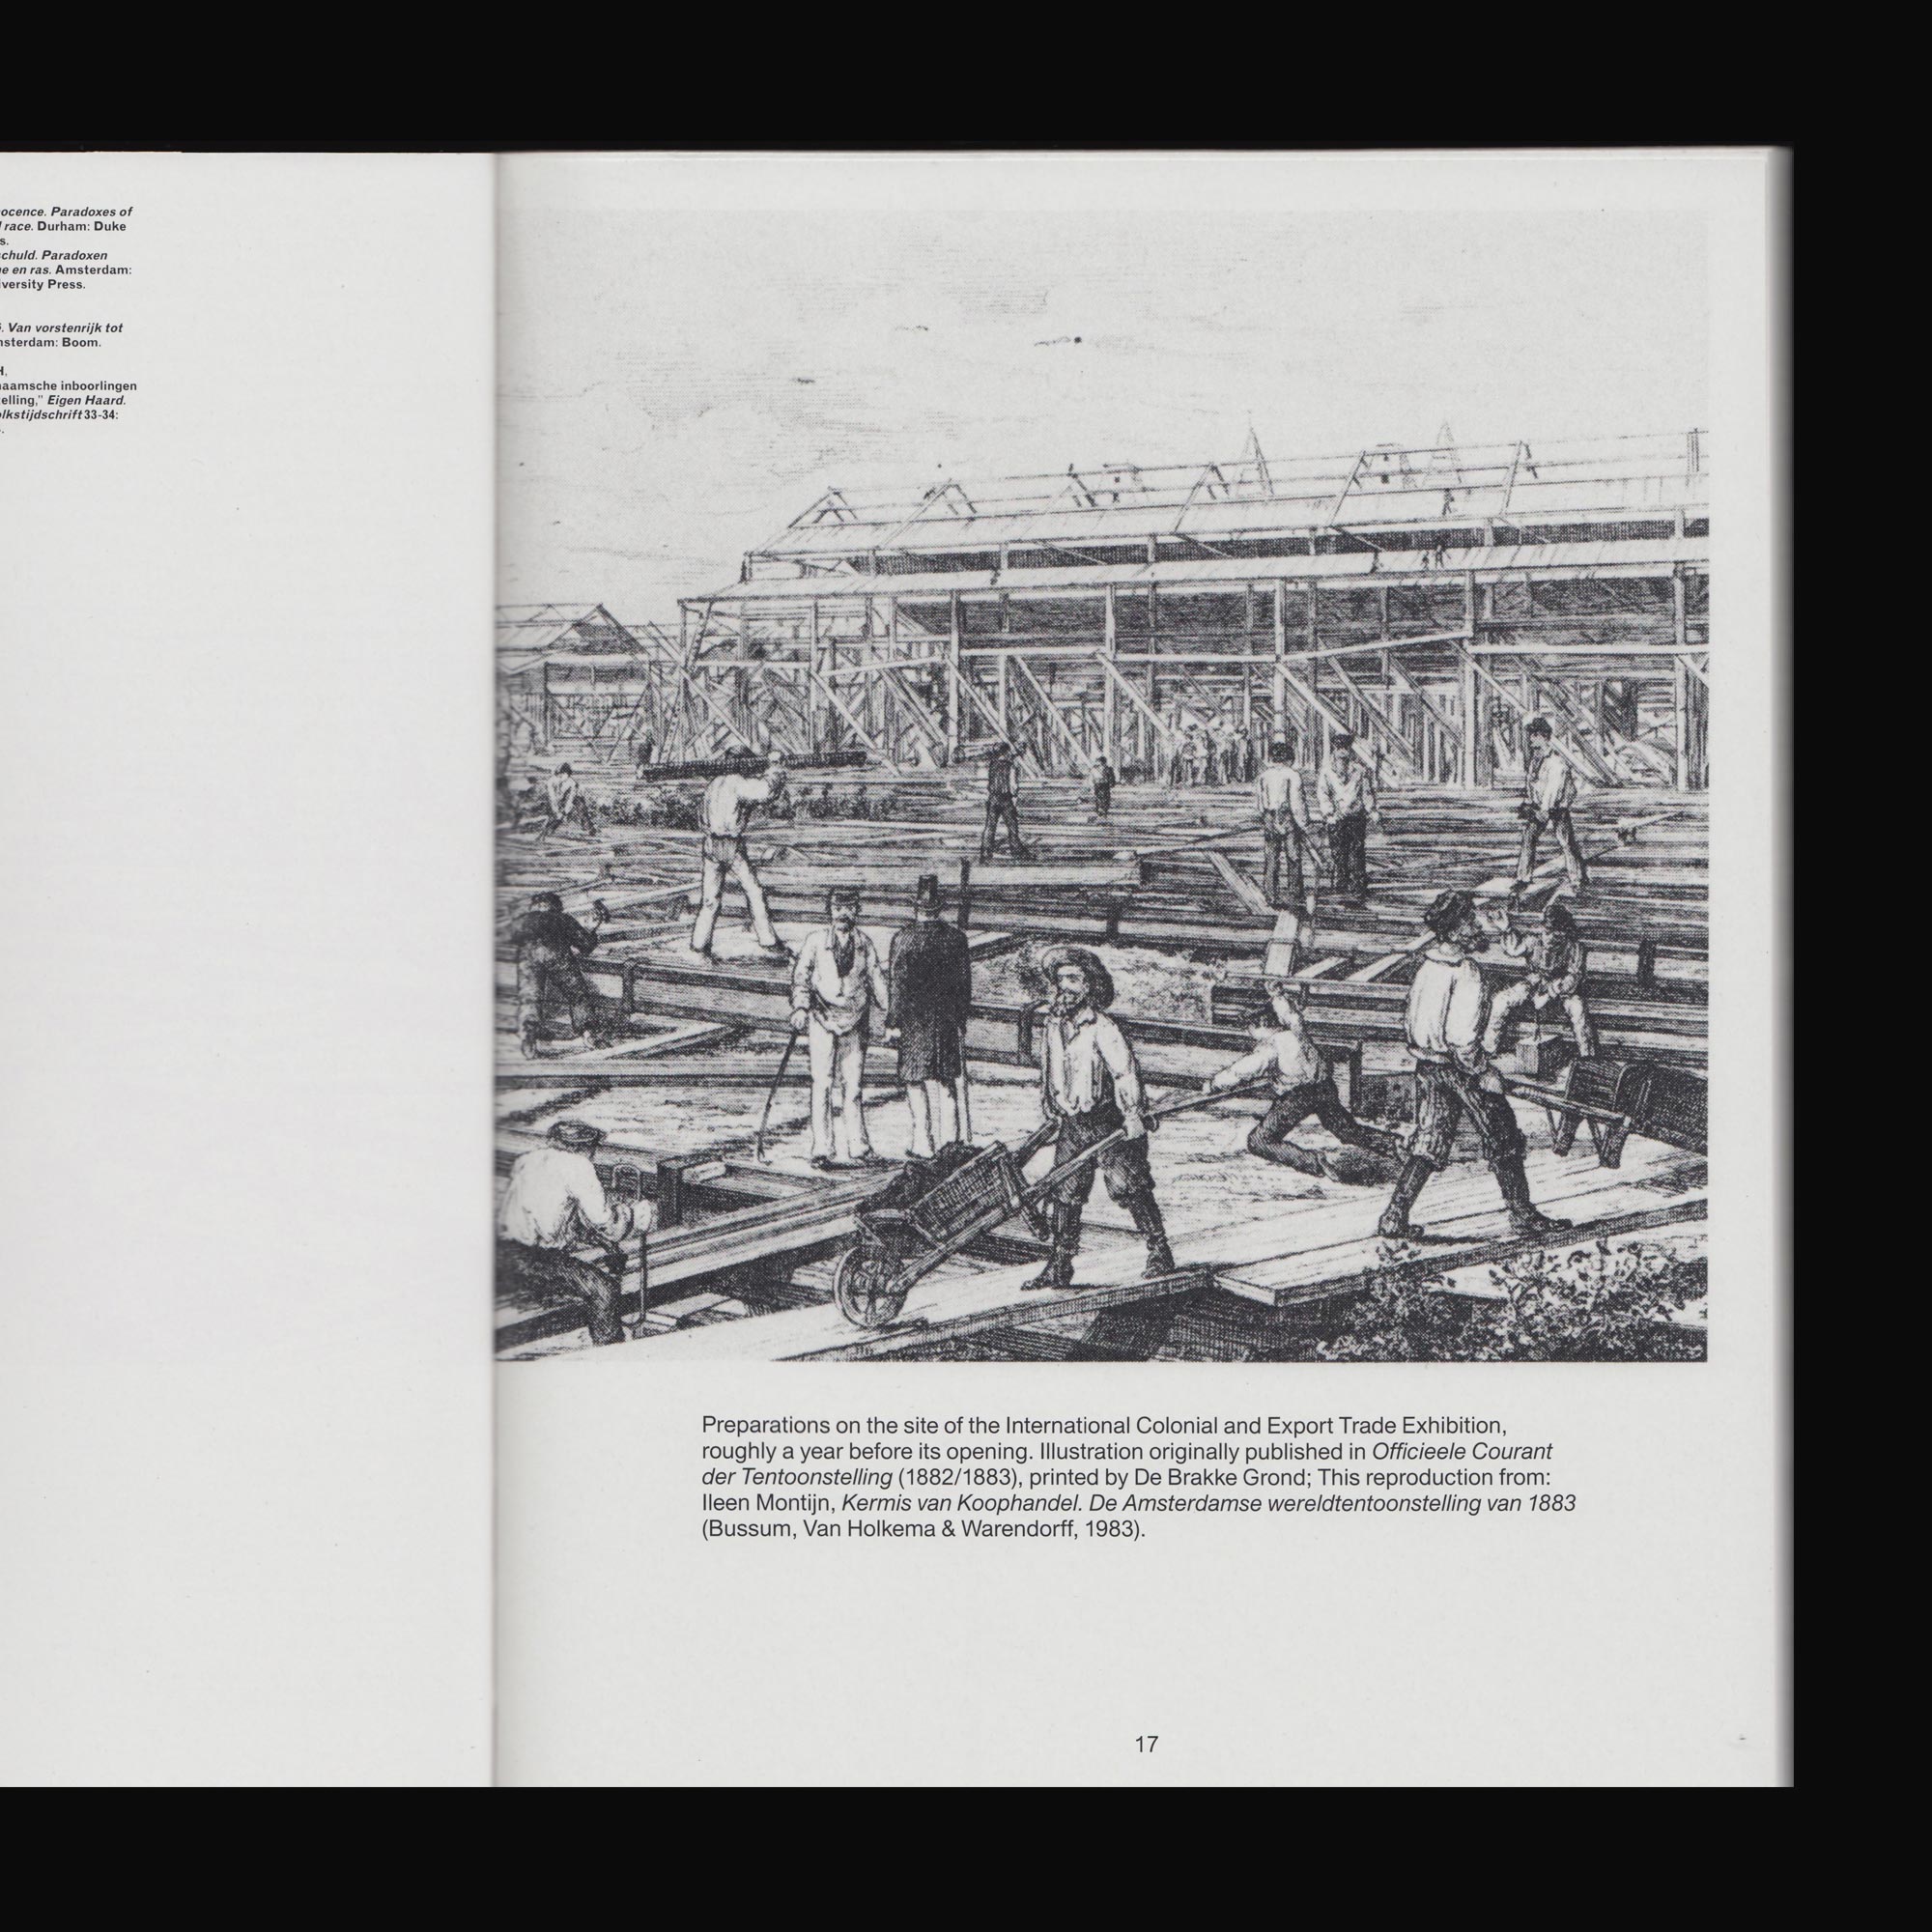 Visit (1883-2020). Notes on Museumplein's exhibitionary complex across coloniality and modernity